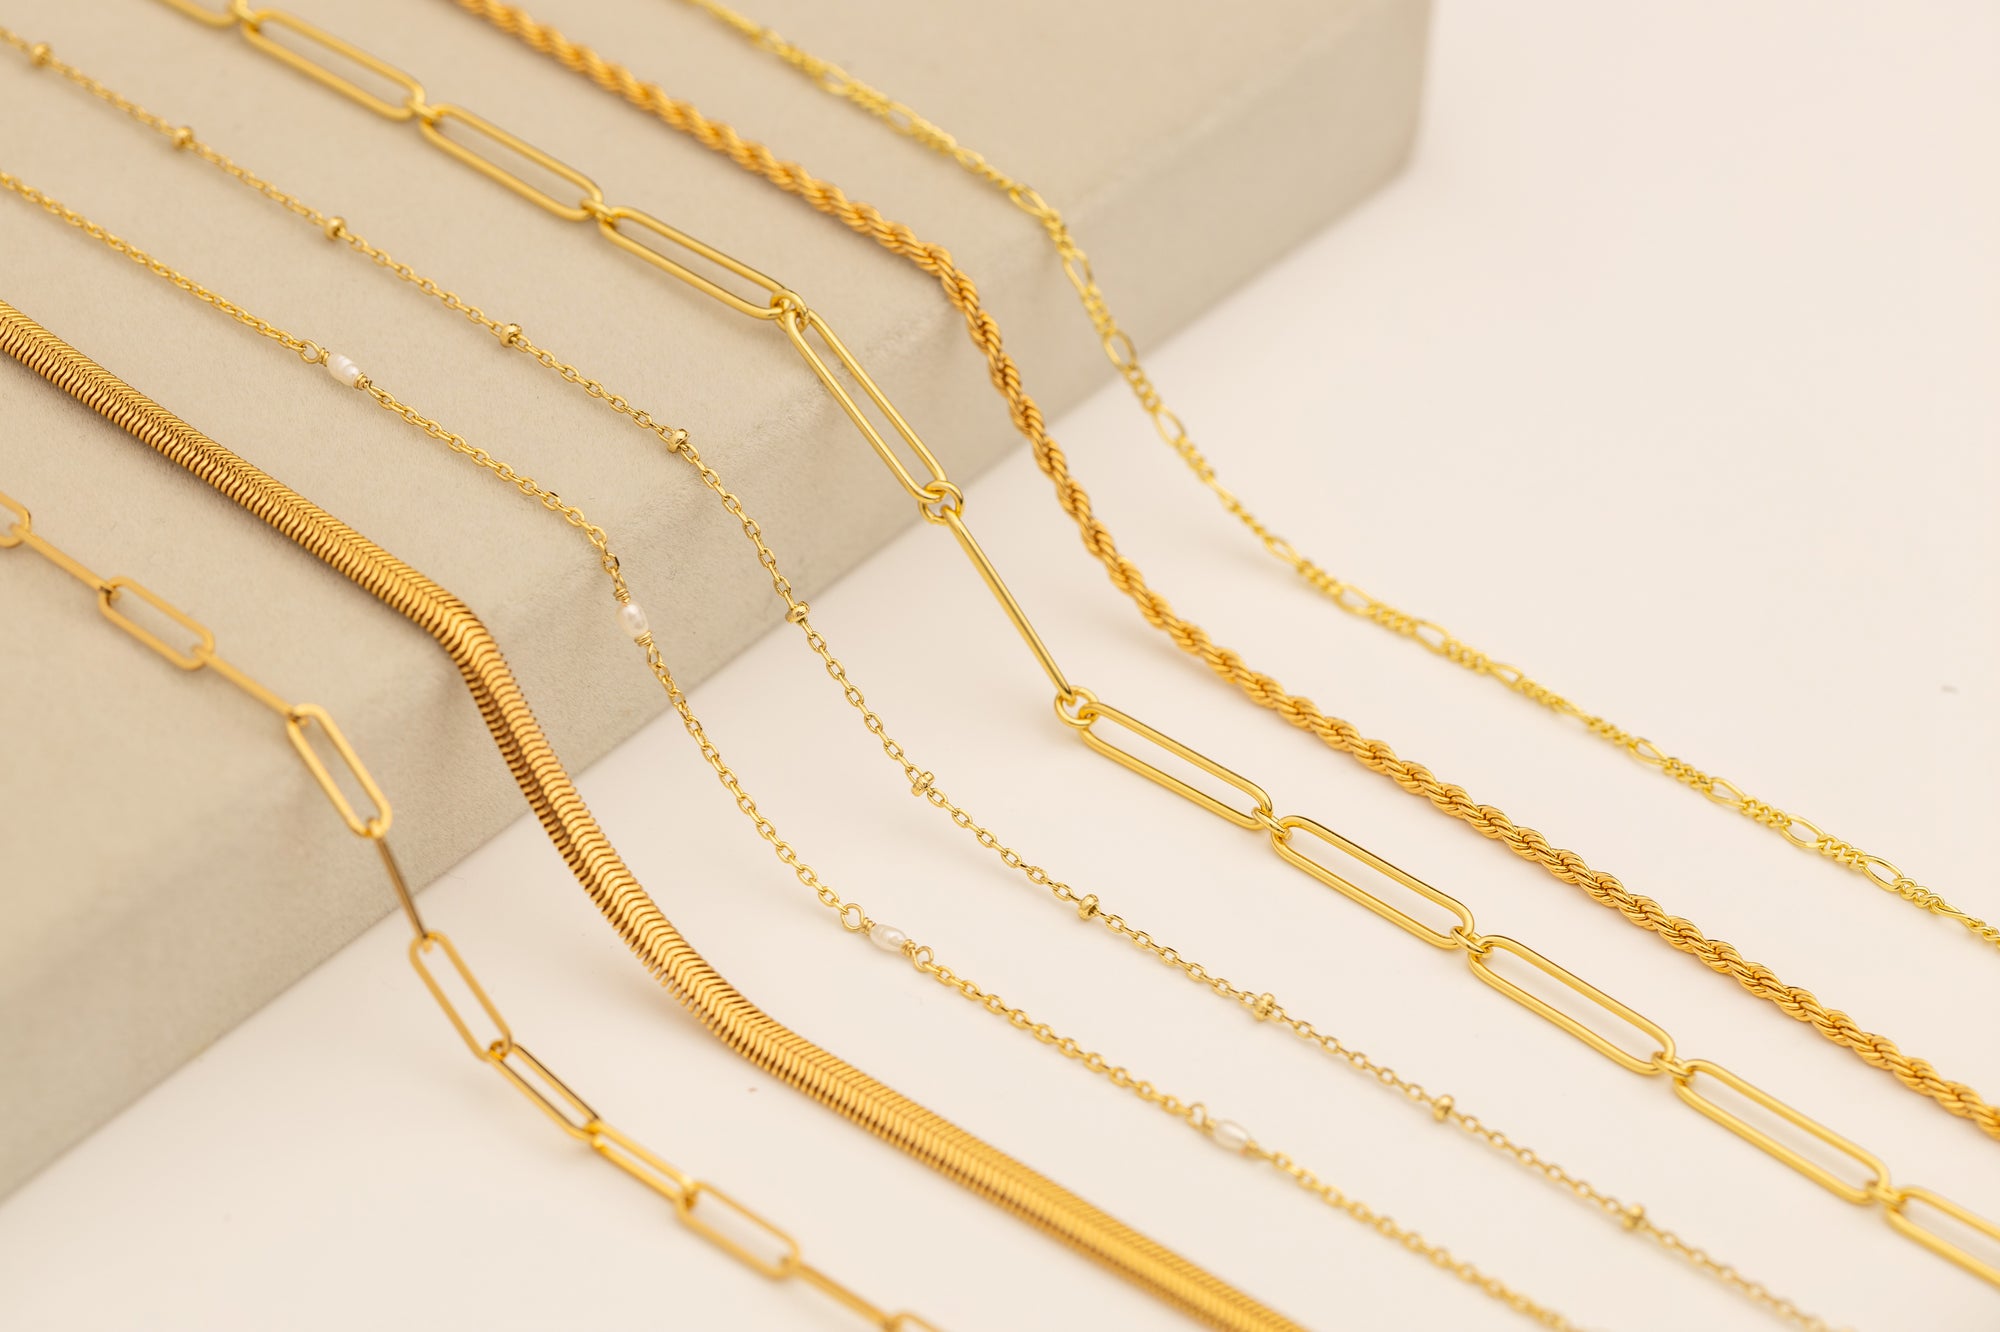 Complete Necklace Guide: Styles, Materials, & Lengths